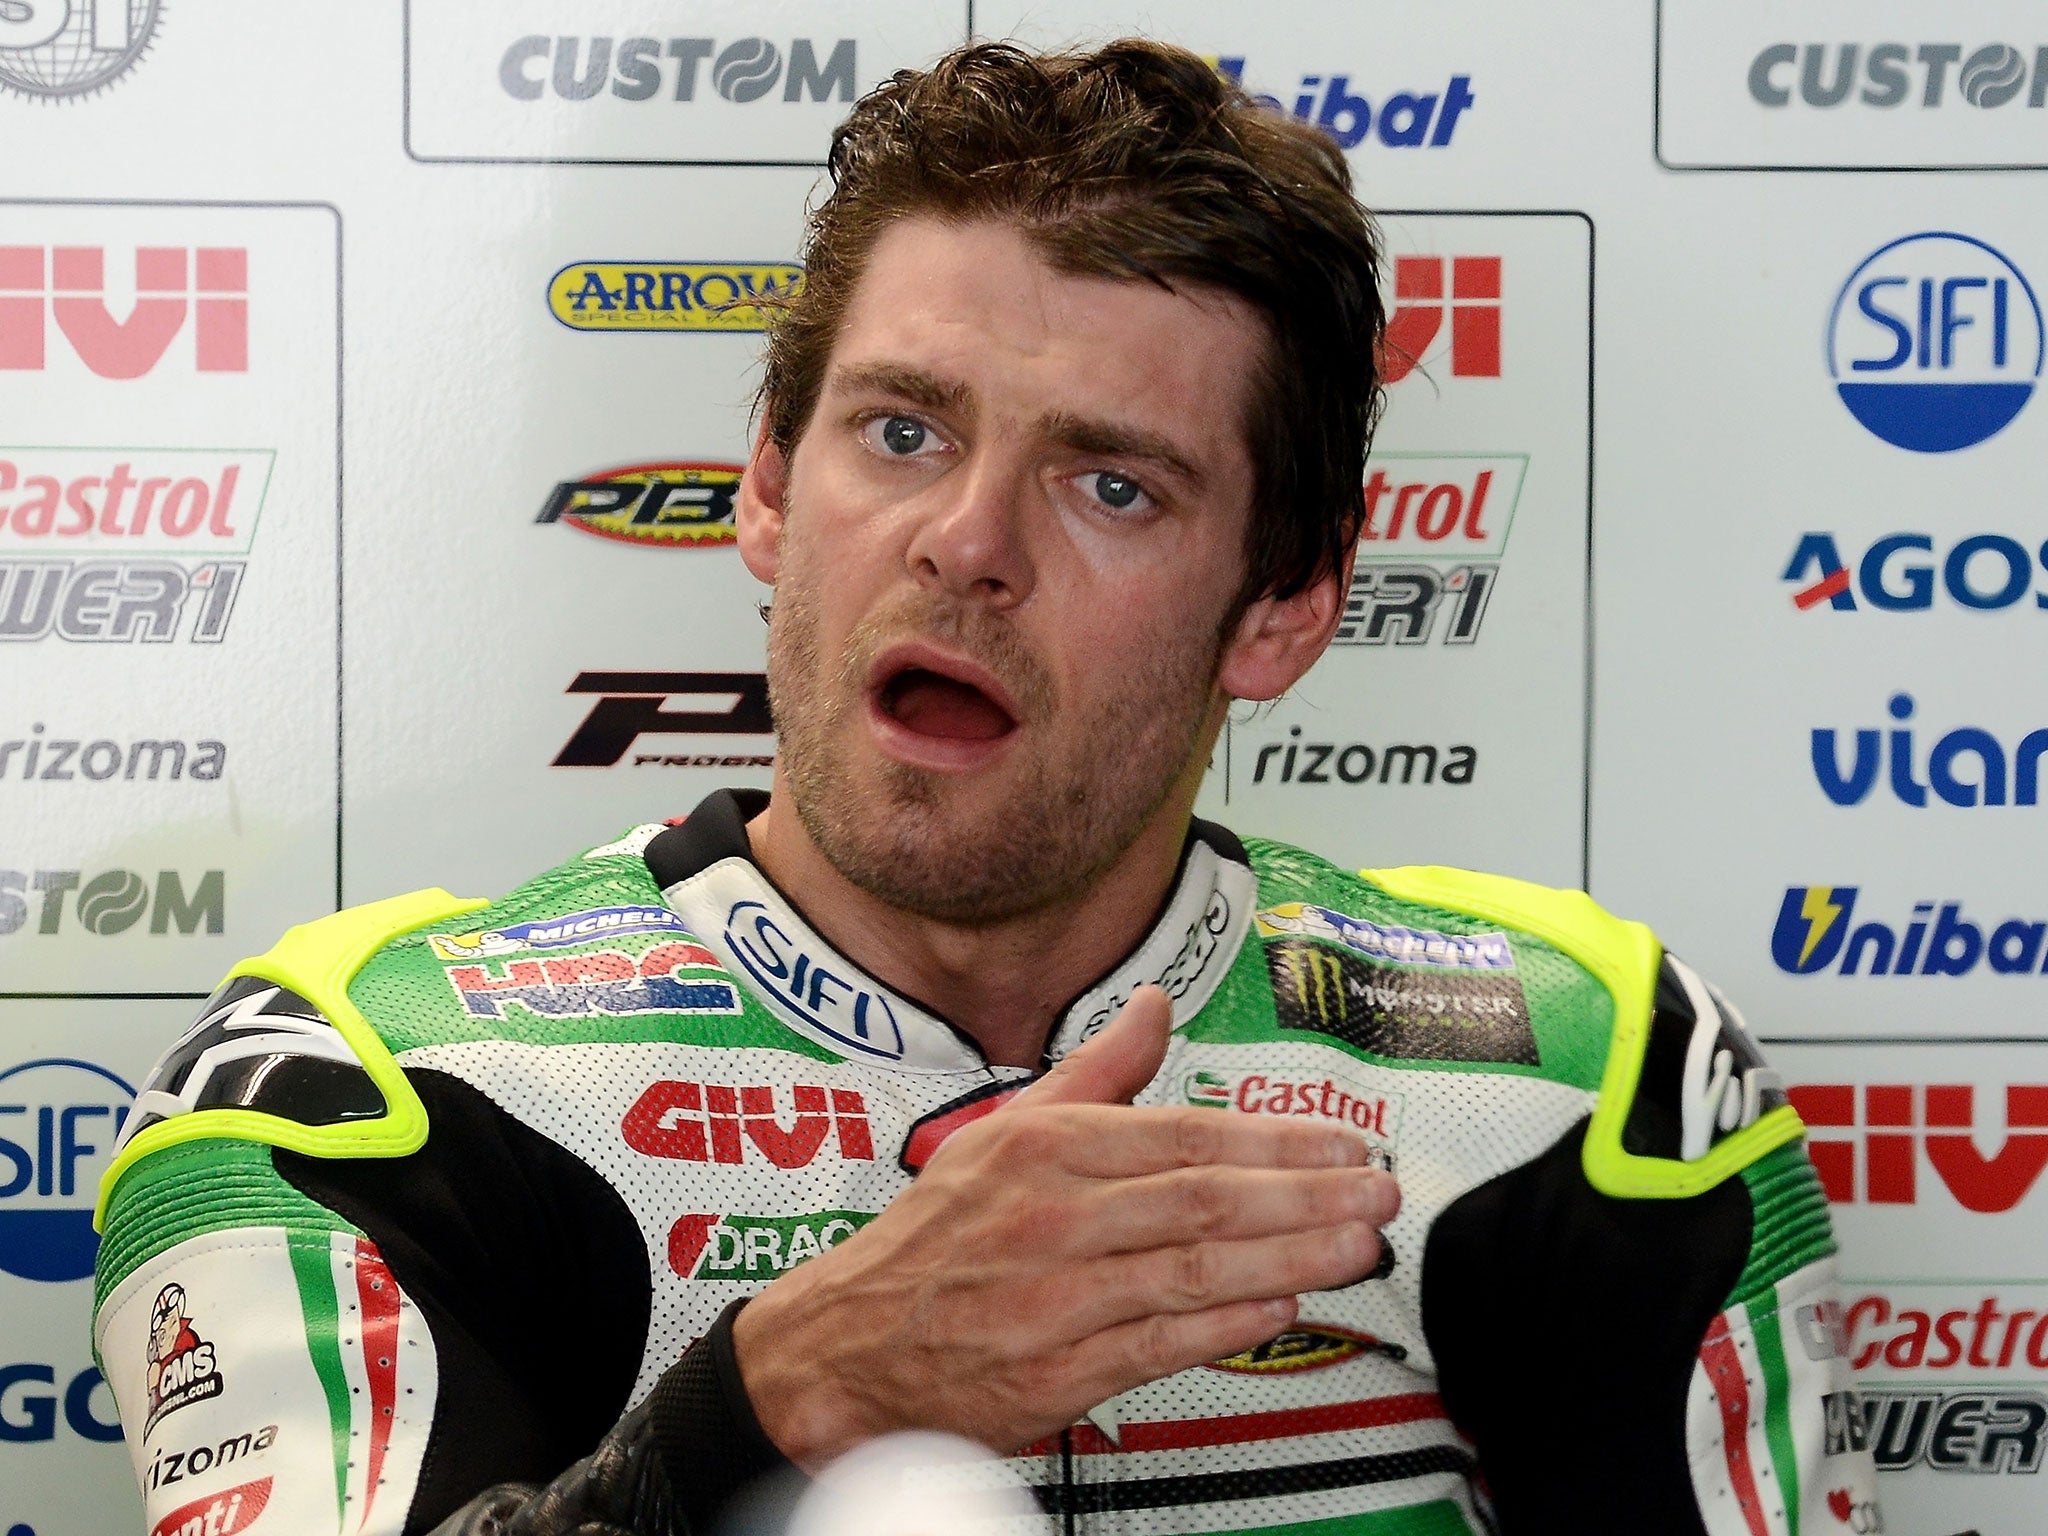 Cal Crutchlow will ride through the pain barrier in the final MotoGP race of the season at Valencia